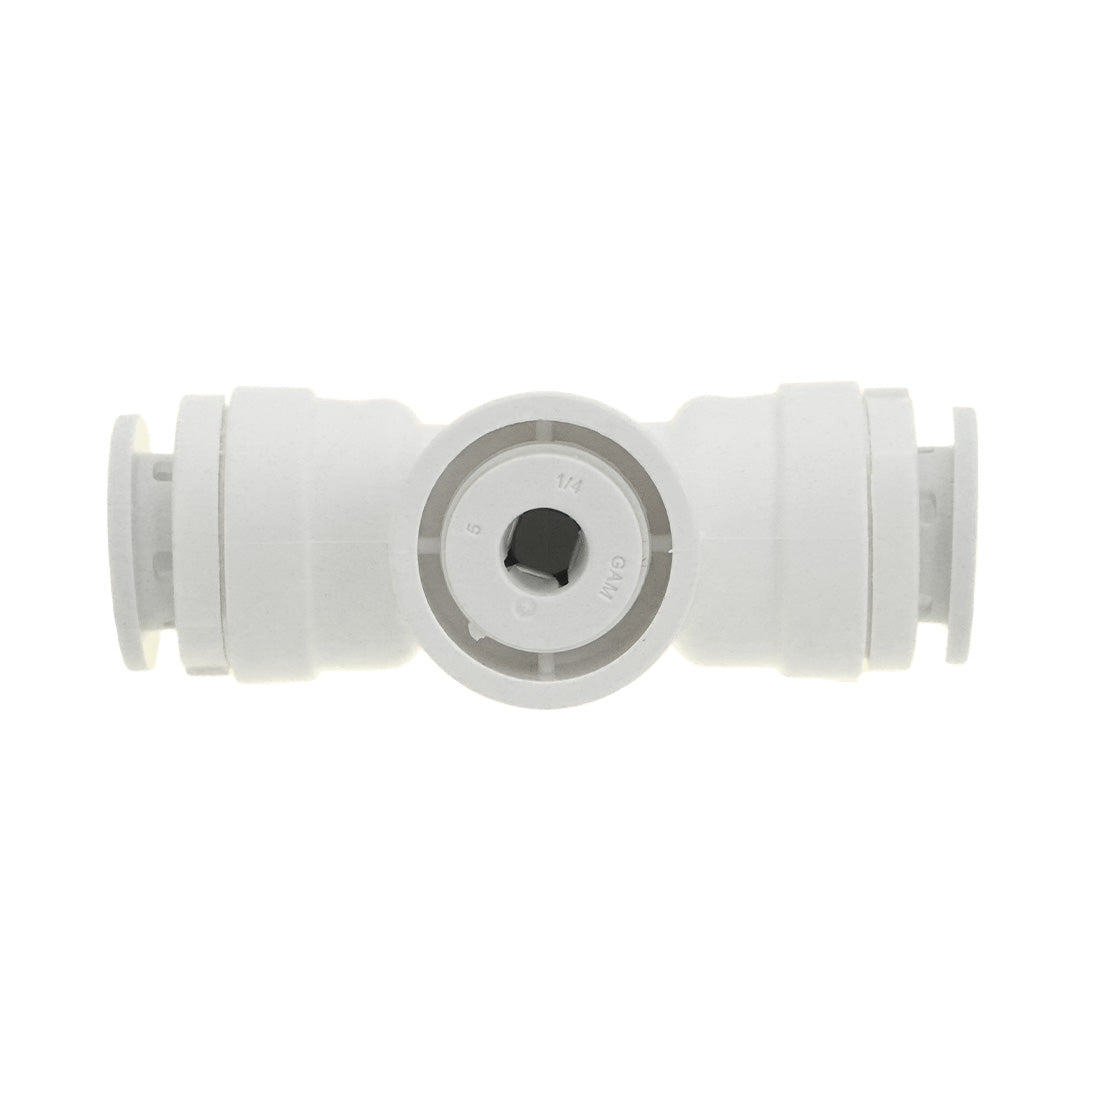 PWP Connector for TDS Meter Probes 1/2 Tube Size Top View